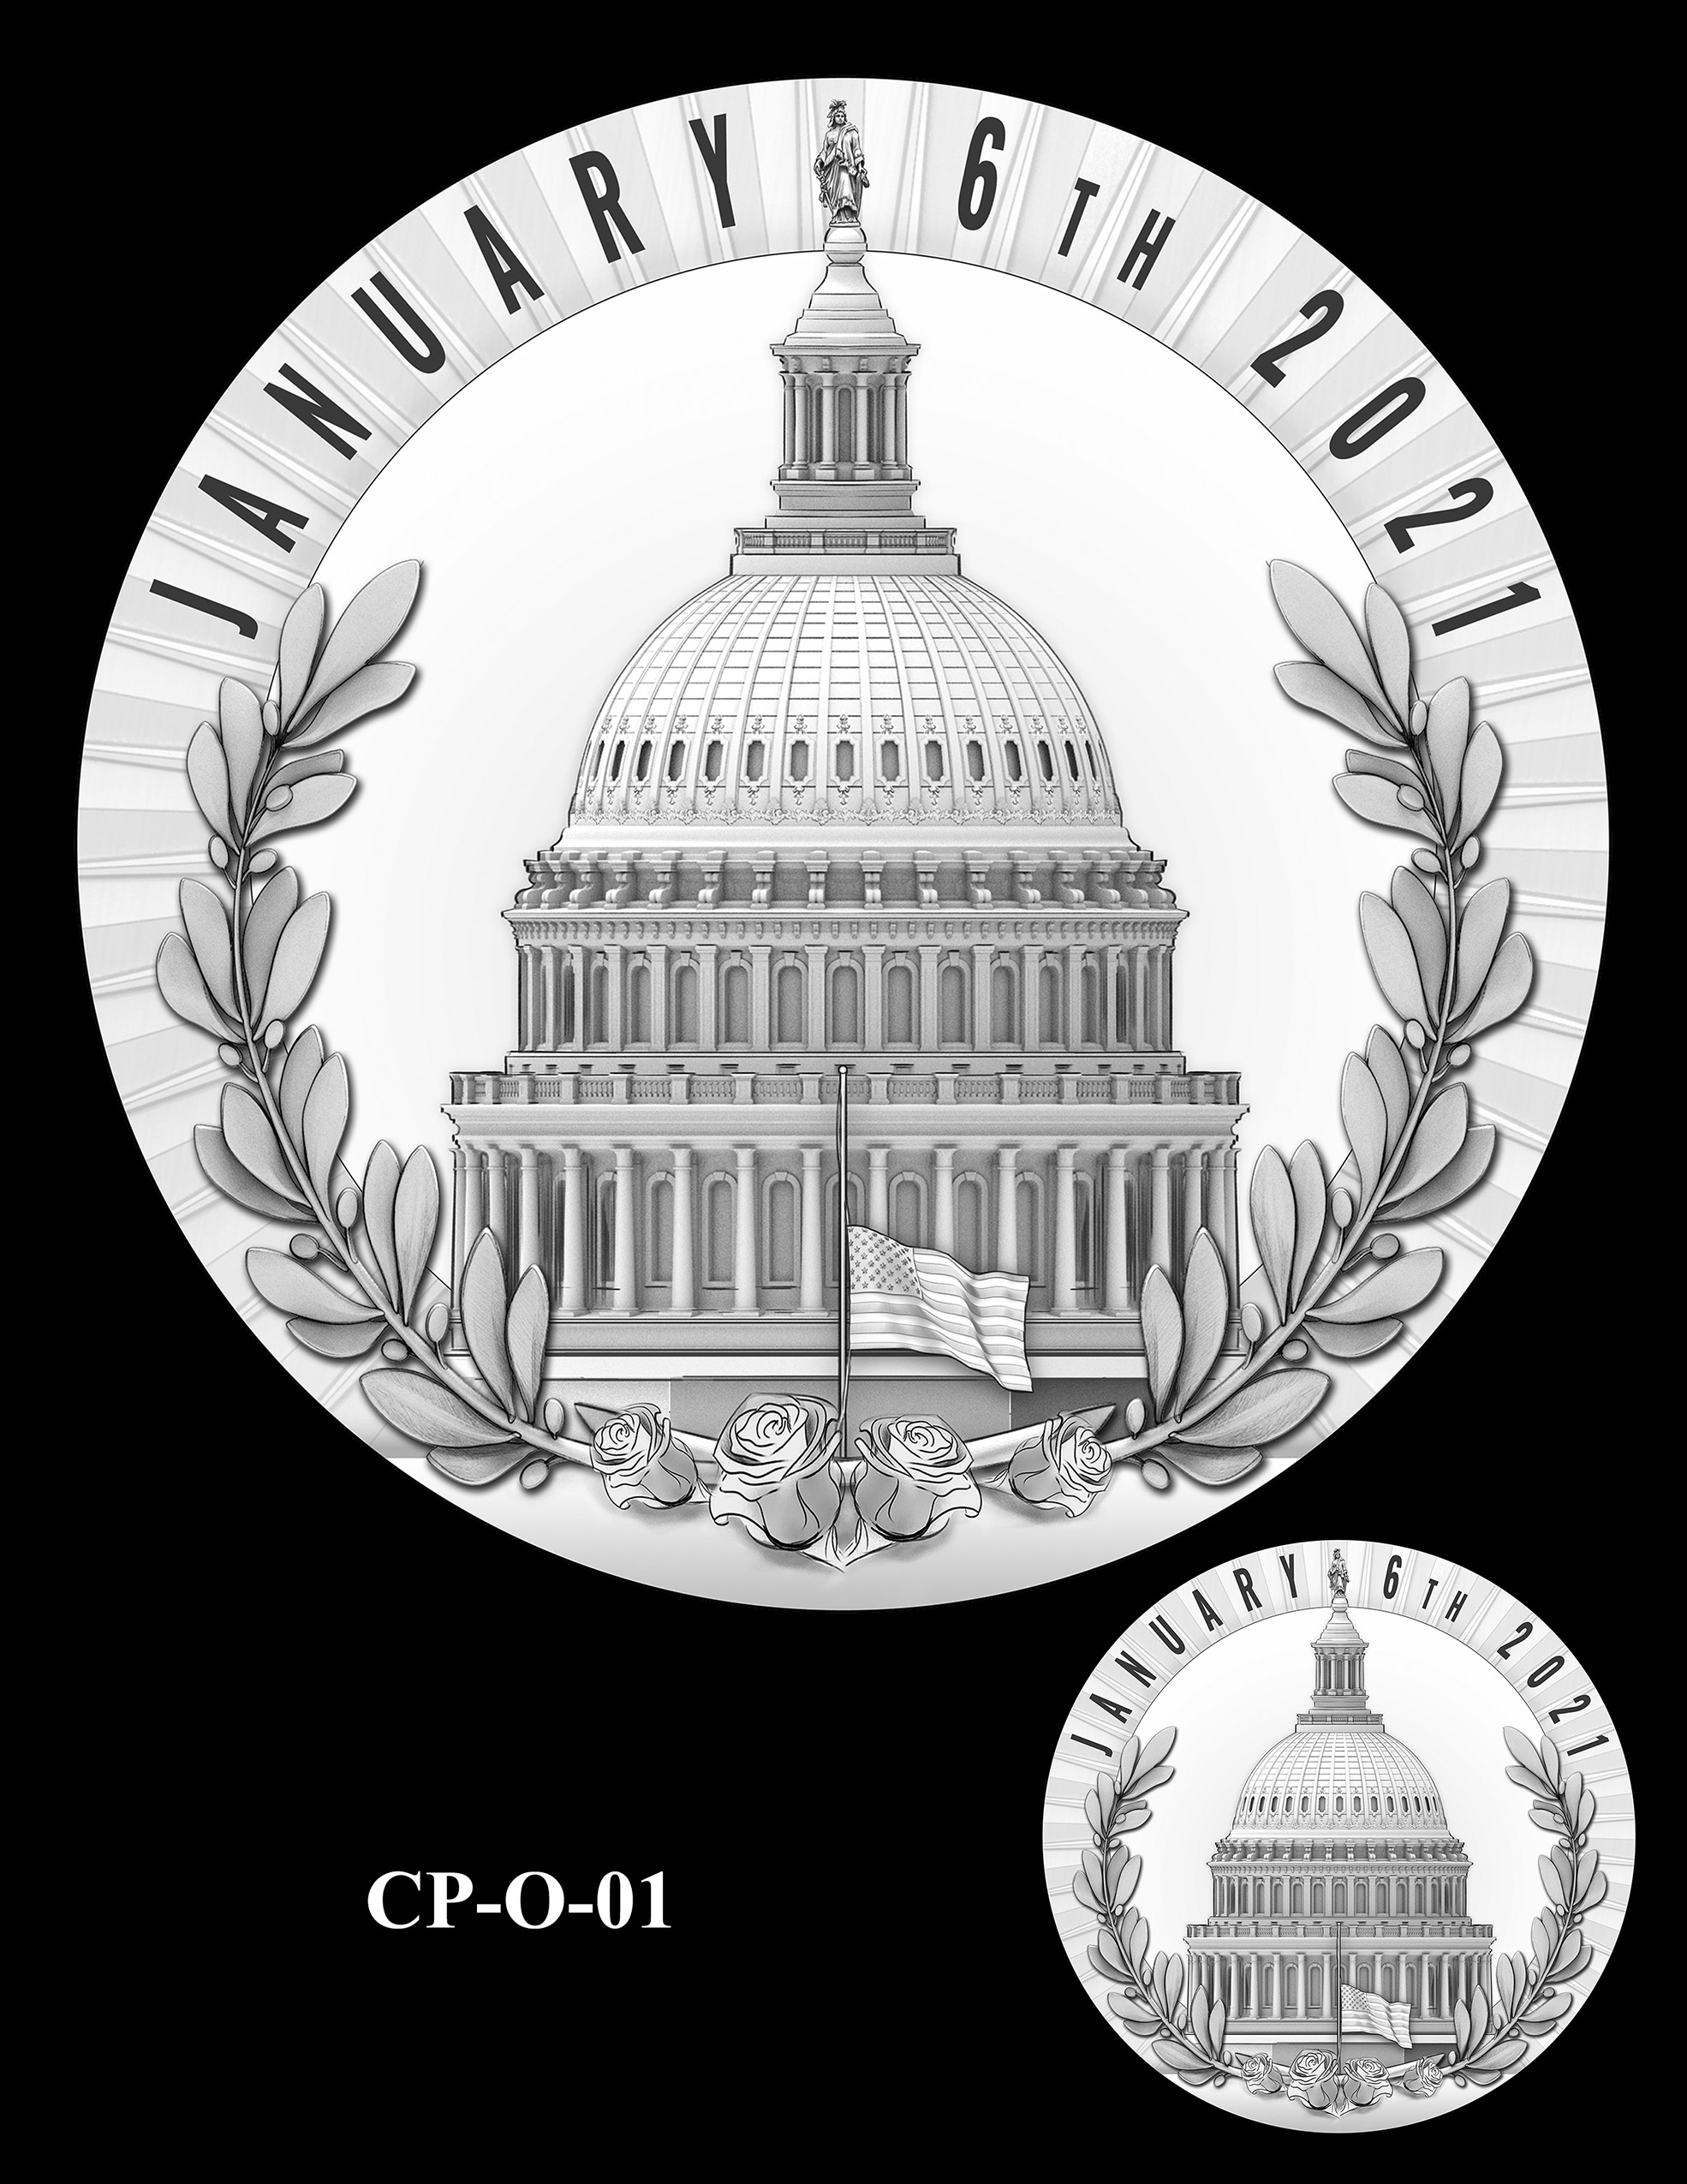 CP-O-01 -- Congressional Gold Medal for Those Who Protected the U.S. Capitol on January 6th 2021